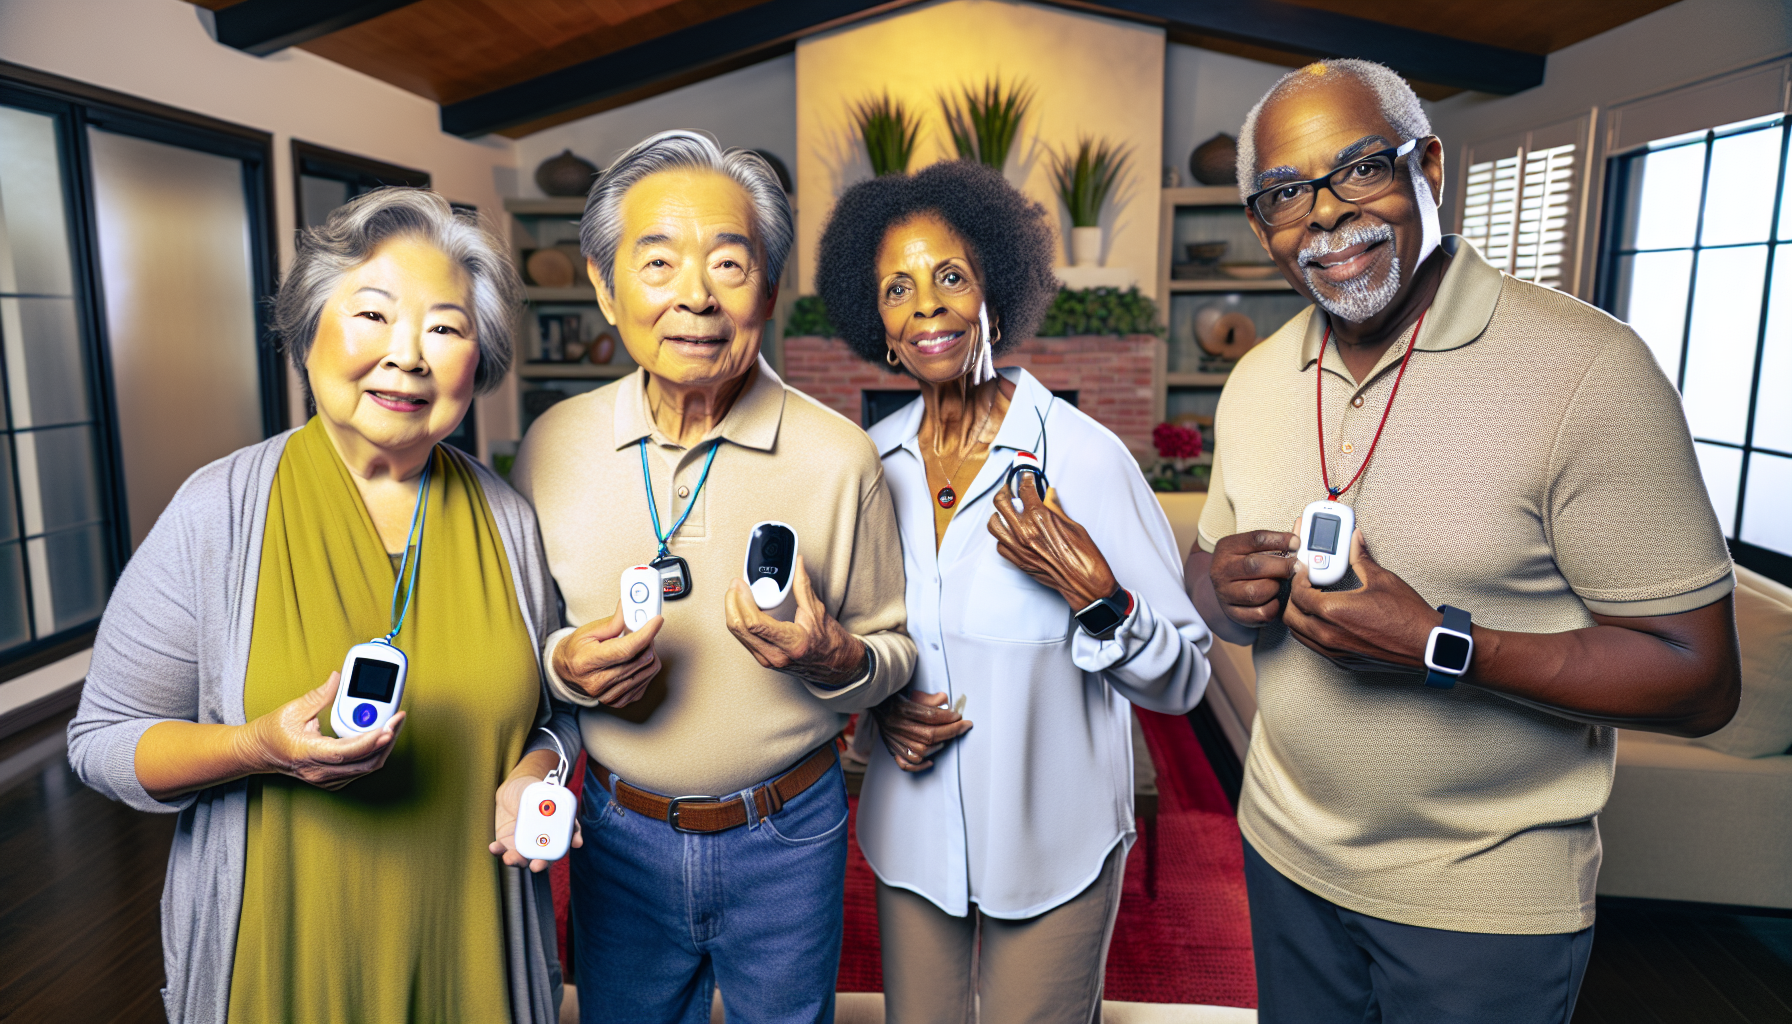 A group of senior individuals smiling and using medical alert devices